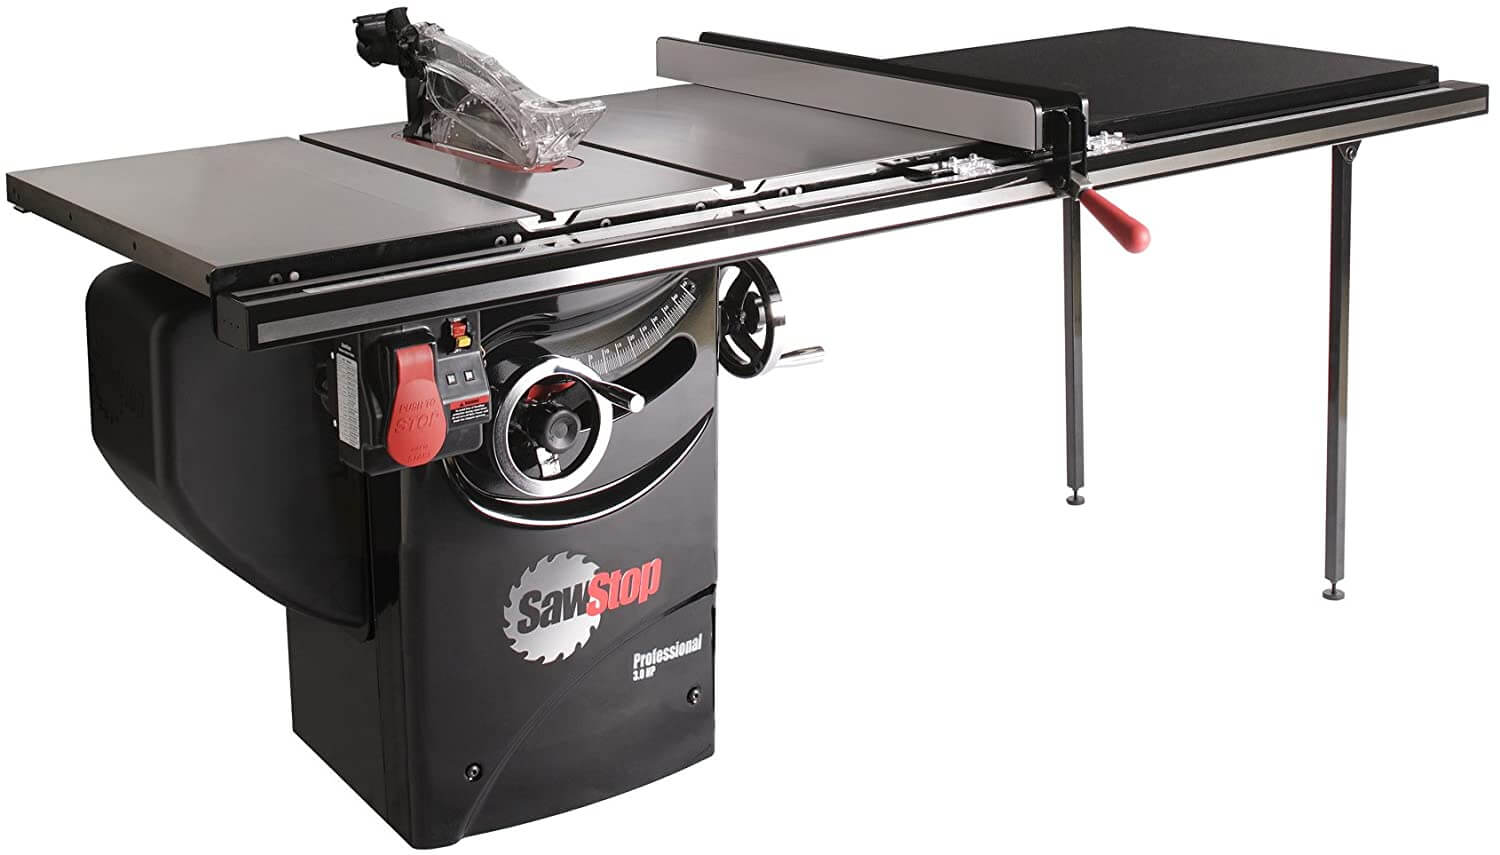 Top 10 Best Portable Table Saw For Fine Woodworking Review